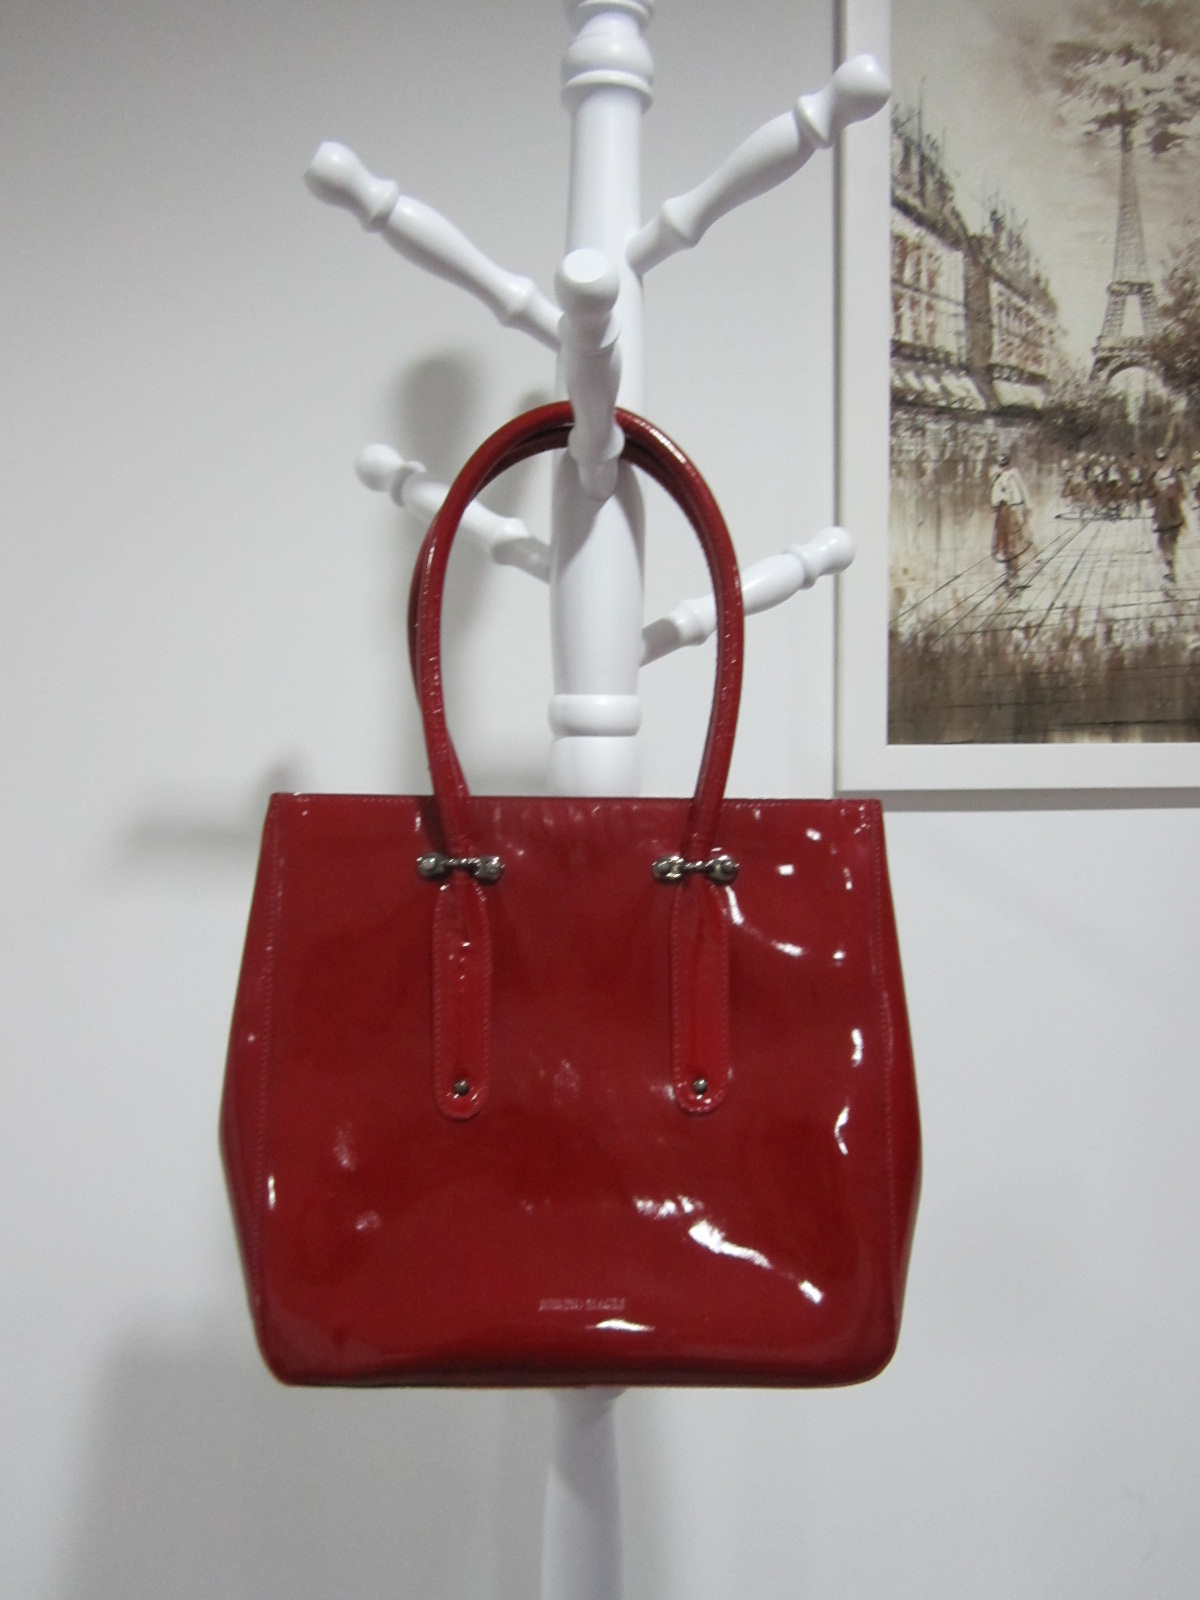 The Bags Affairs ~ Satisfy your lust for designer bags: FURTHER MARK ...